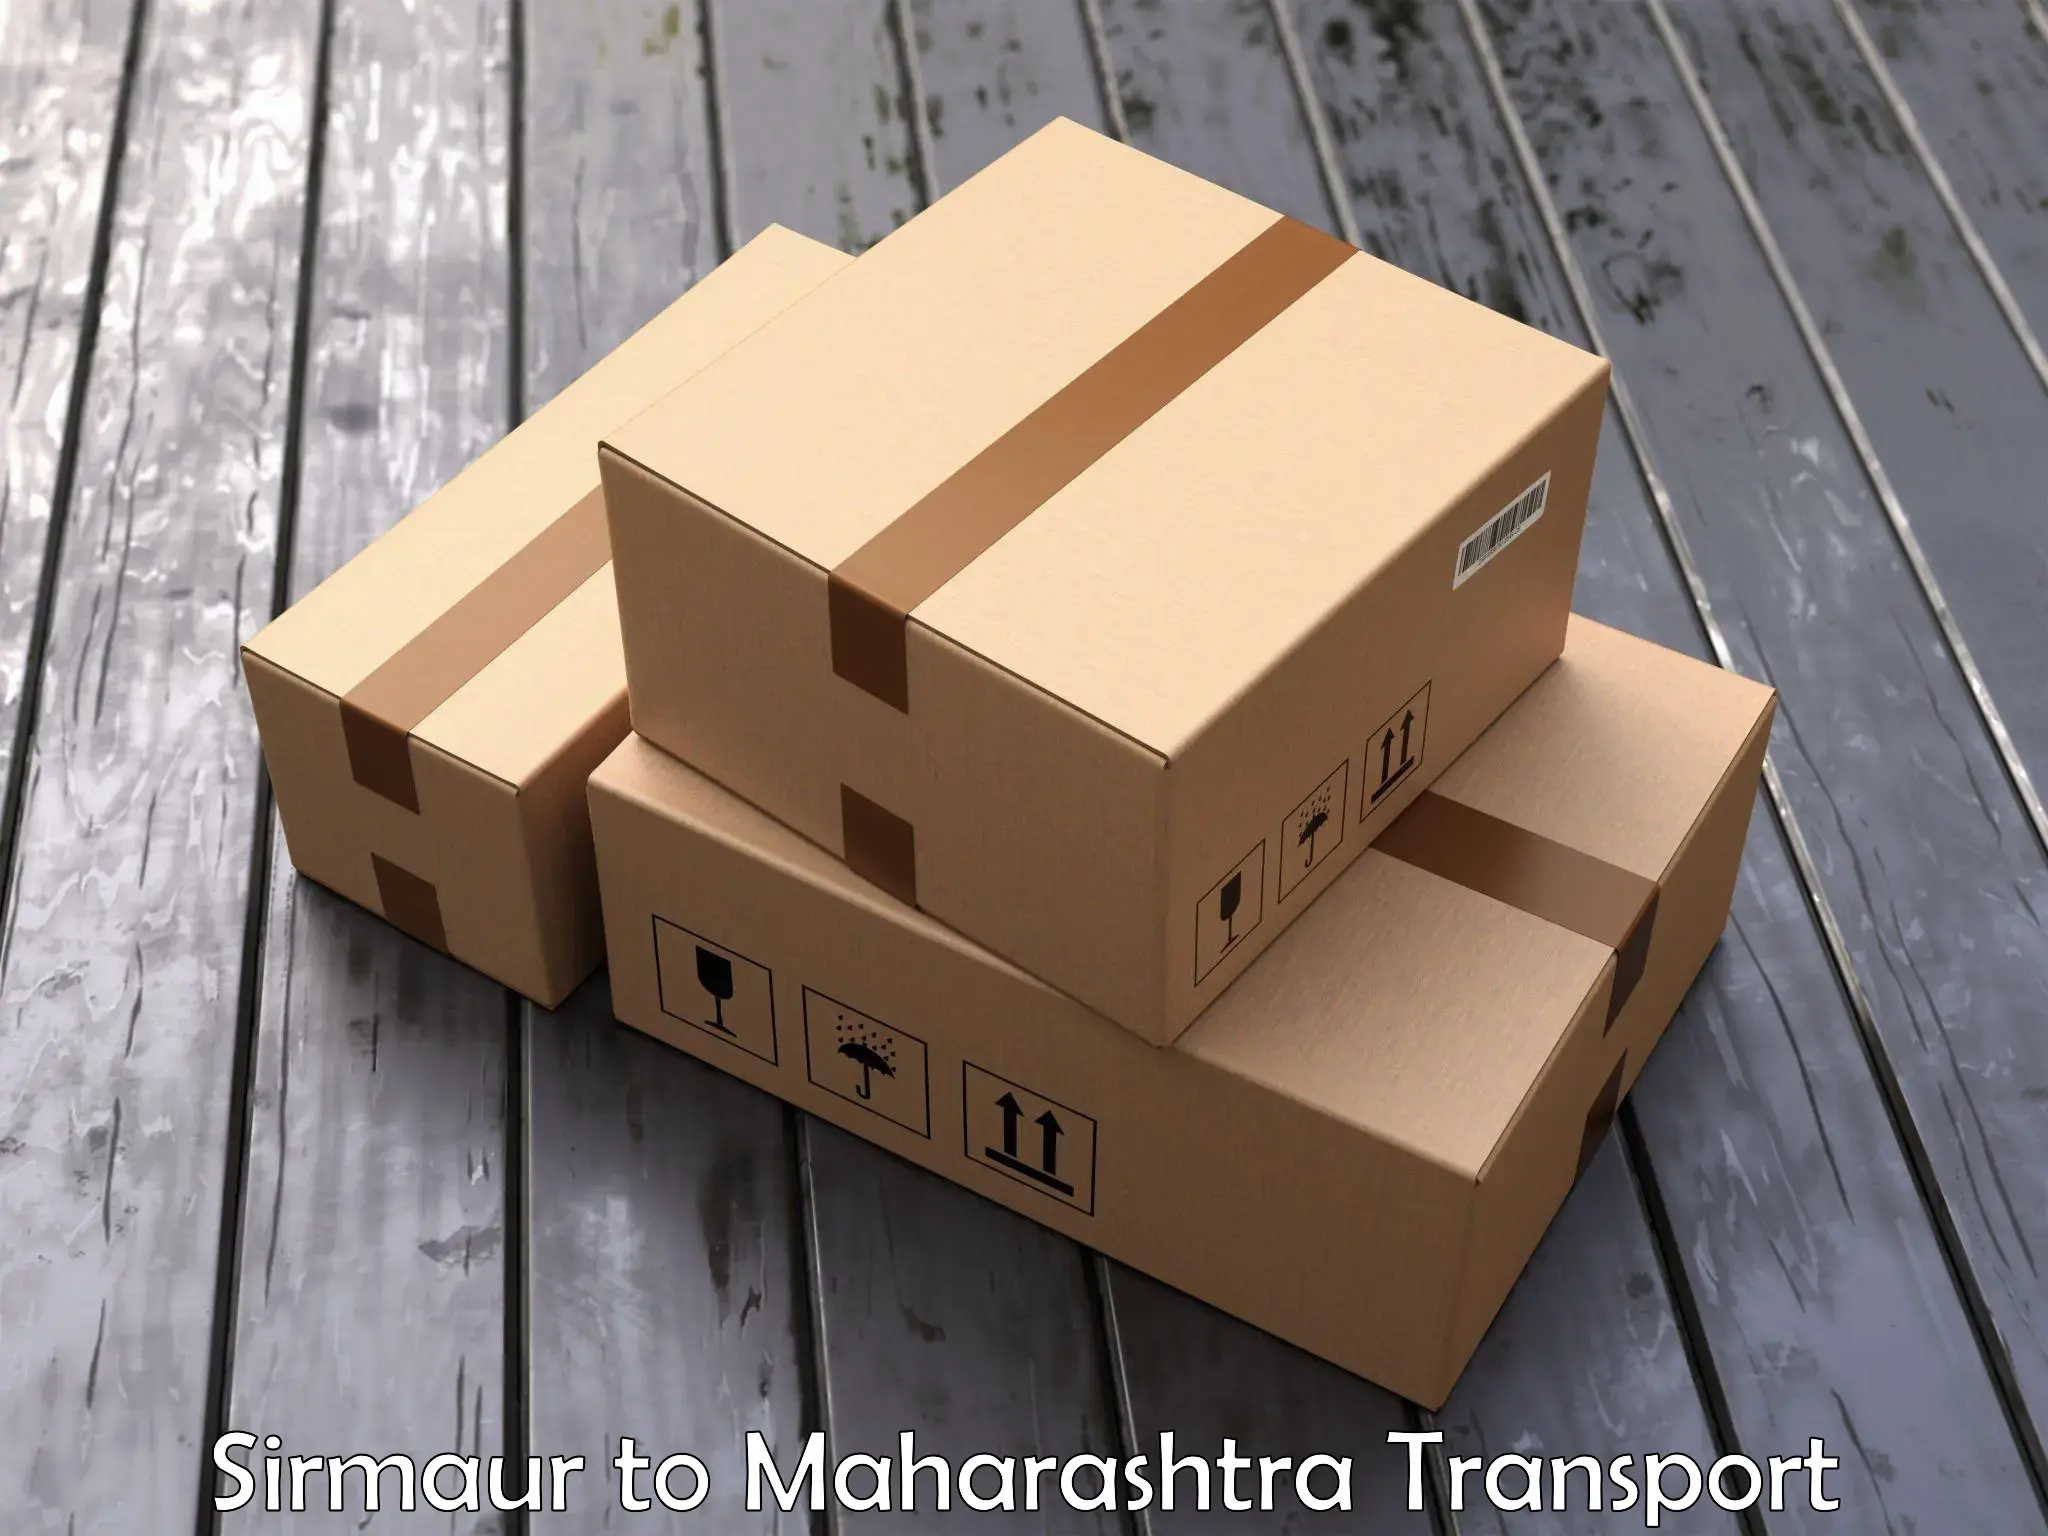 Goods delivery service Sirmaur to Parbhani